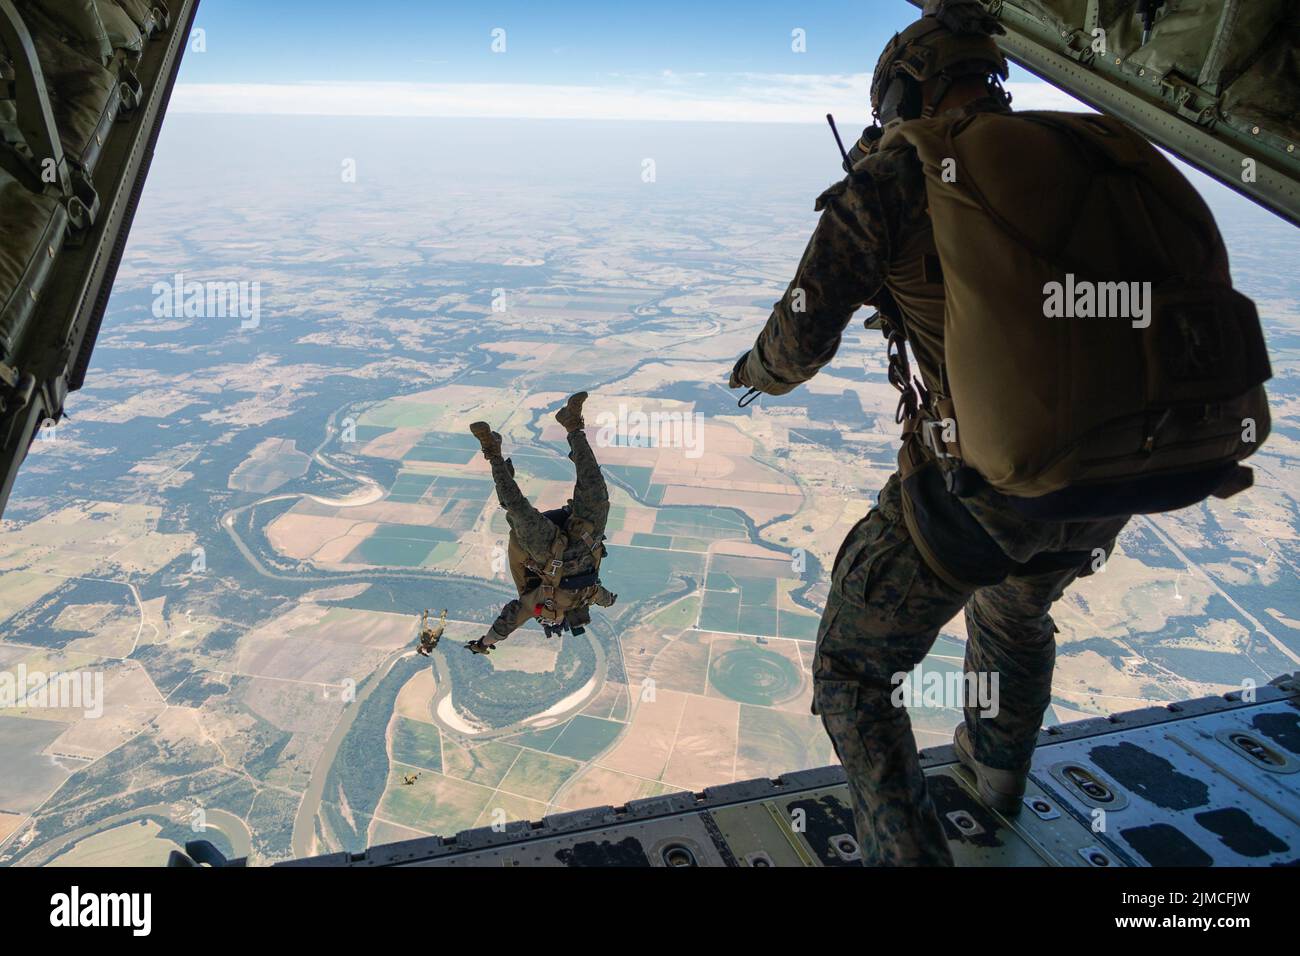 U.S. Marines with Force Reconnaissance Company, III Marine Expeditionary Force, jump from a C-130 Hercules at Hearne Municipal Airport, Hearne, Texas, July 20, 2022. This training was conducted during exercise Desert Eagle 2022 to reinforce proper techniques and the Marines’ proficiency in support of future III MEF operations within the Indo-Pacific region. (U.S. Marine Corps photo by Cpl. Zachary Sarvey) Stock Photo